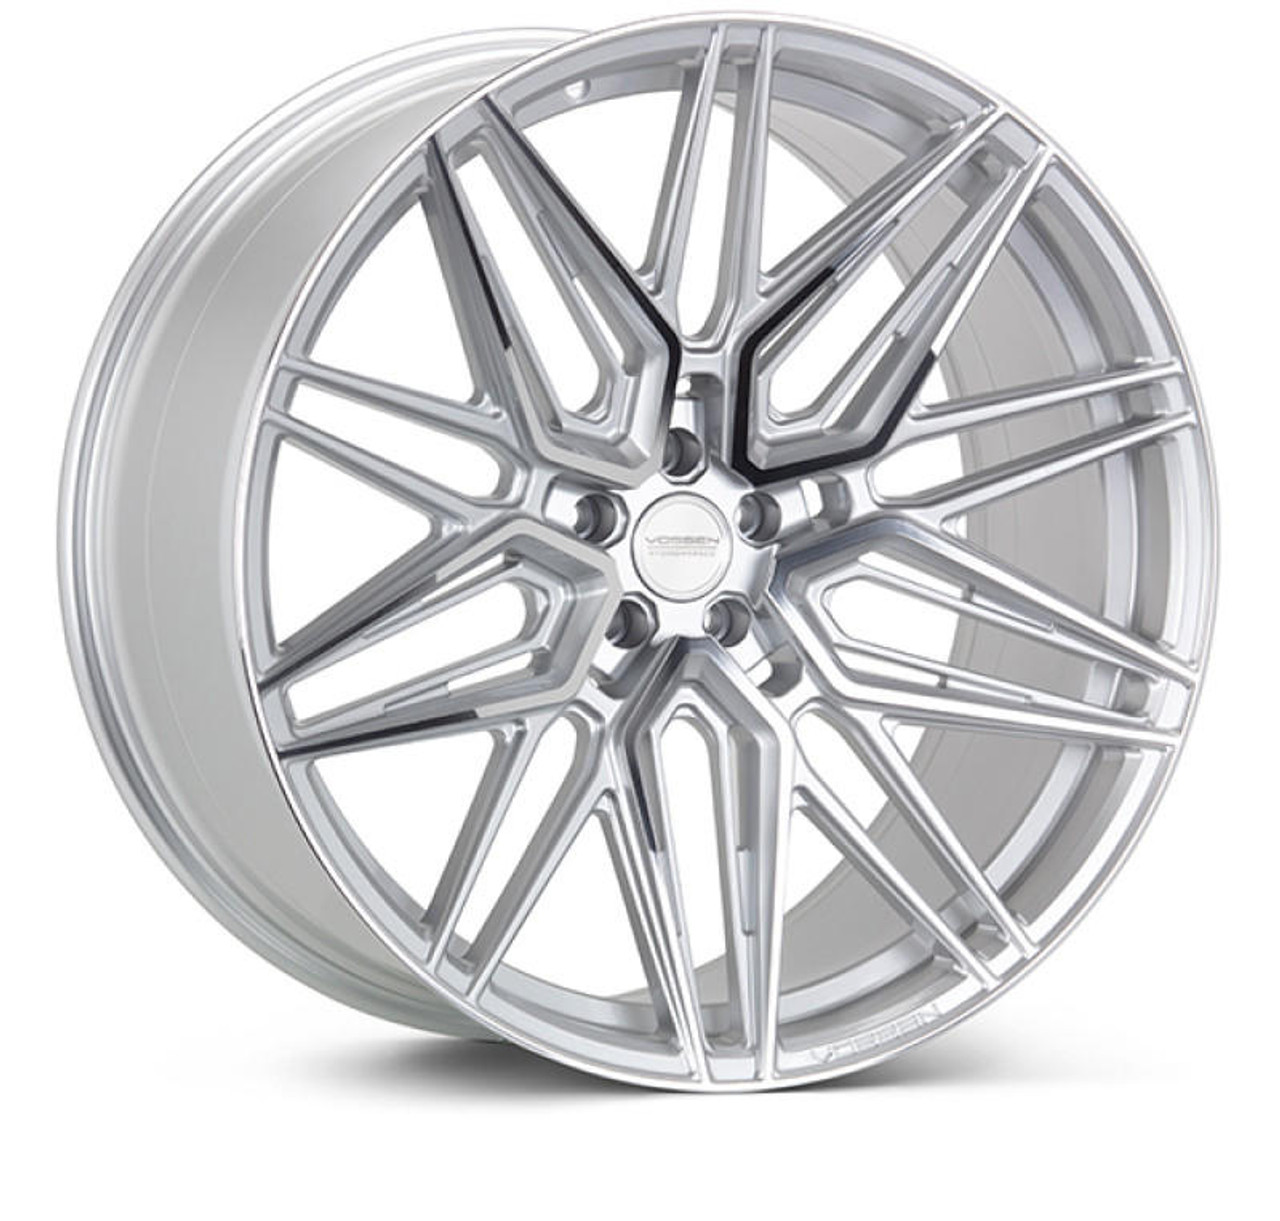  Vossen HF-7 23x10.5 / 5x130 / ET25 / Mid Face / 84.1 - Silver Polished - HF7-3P50 